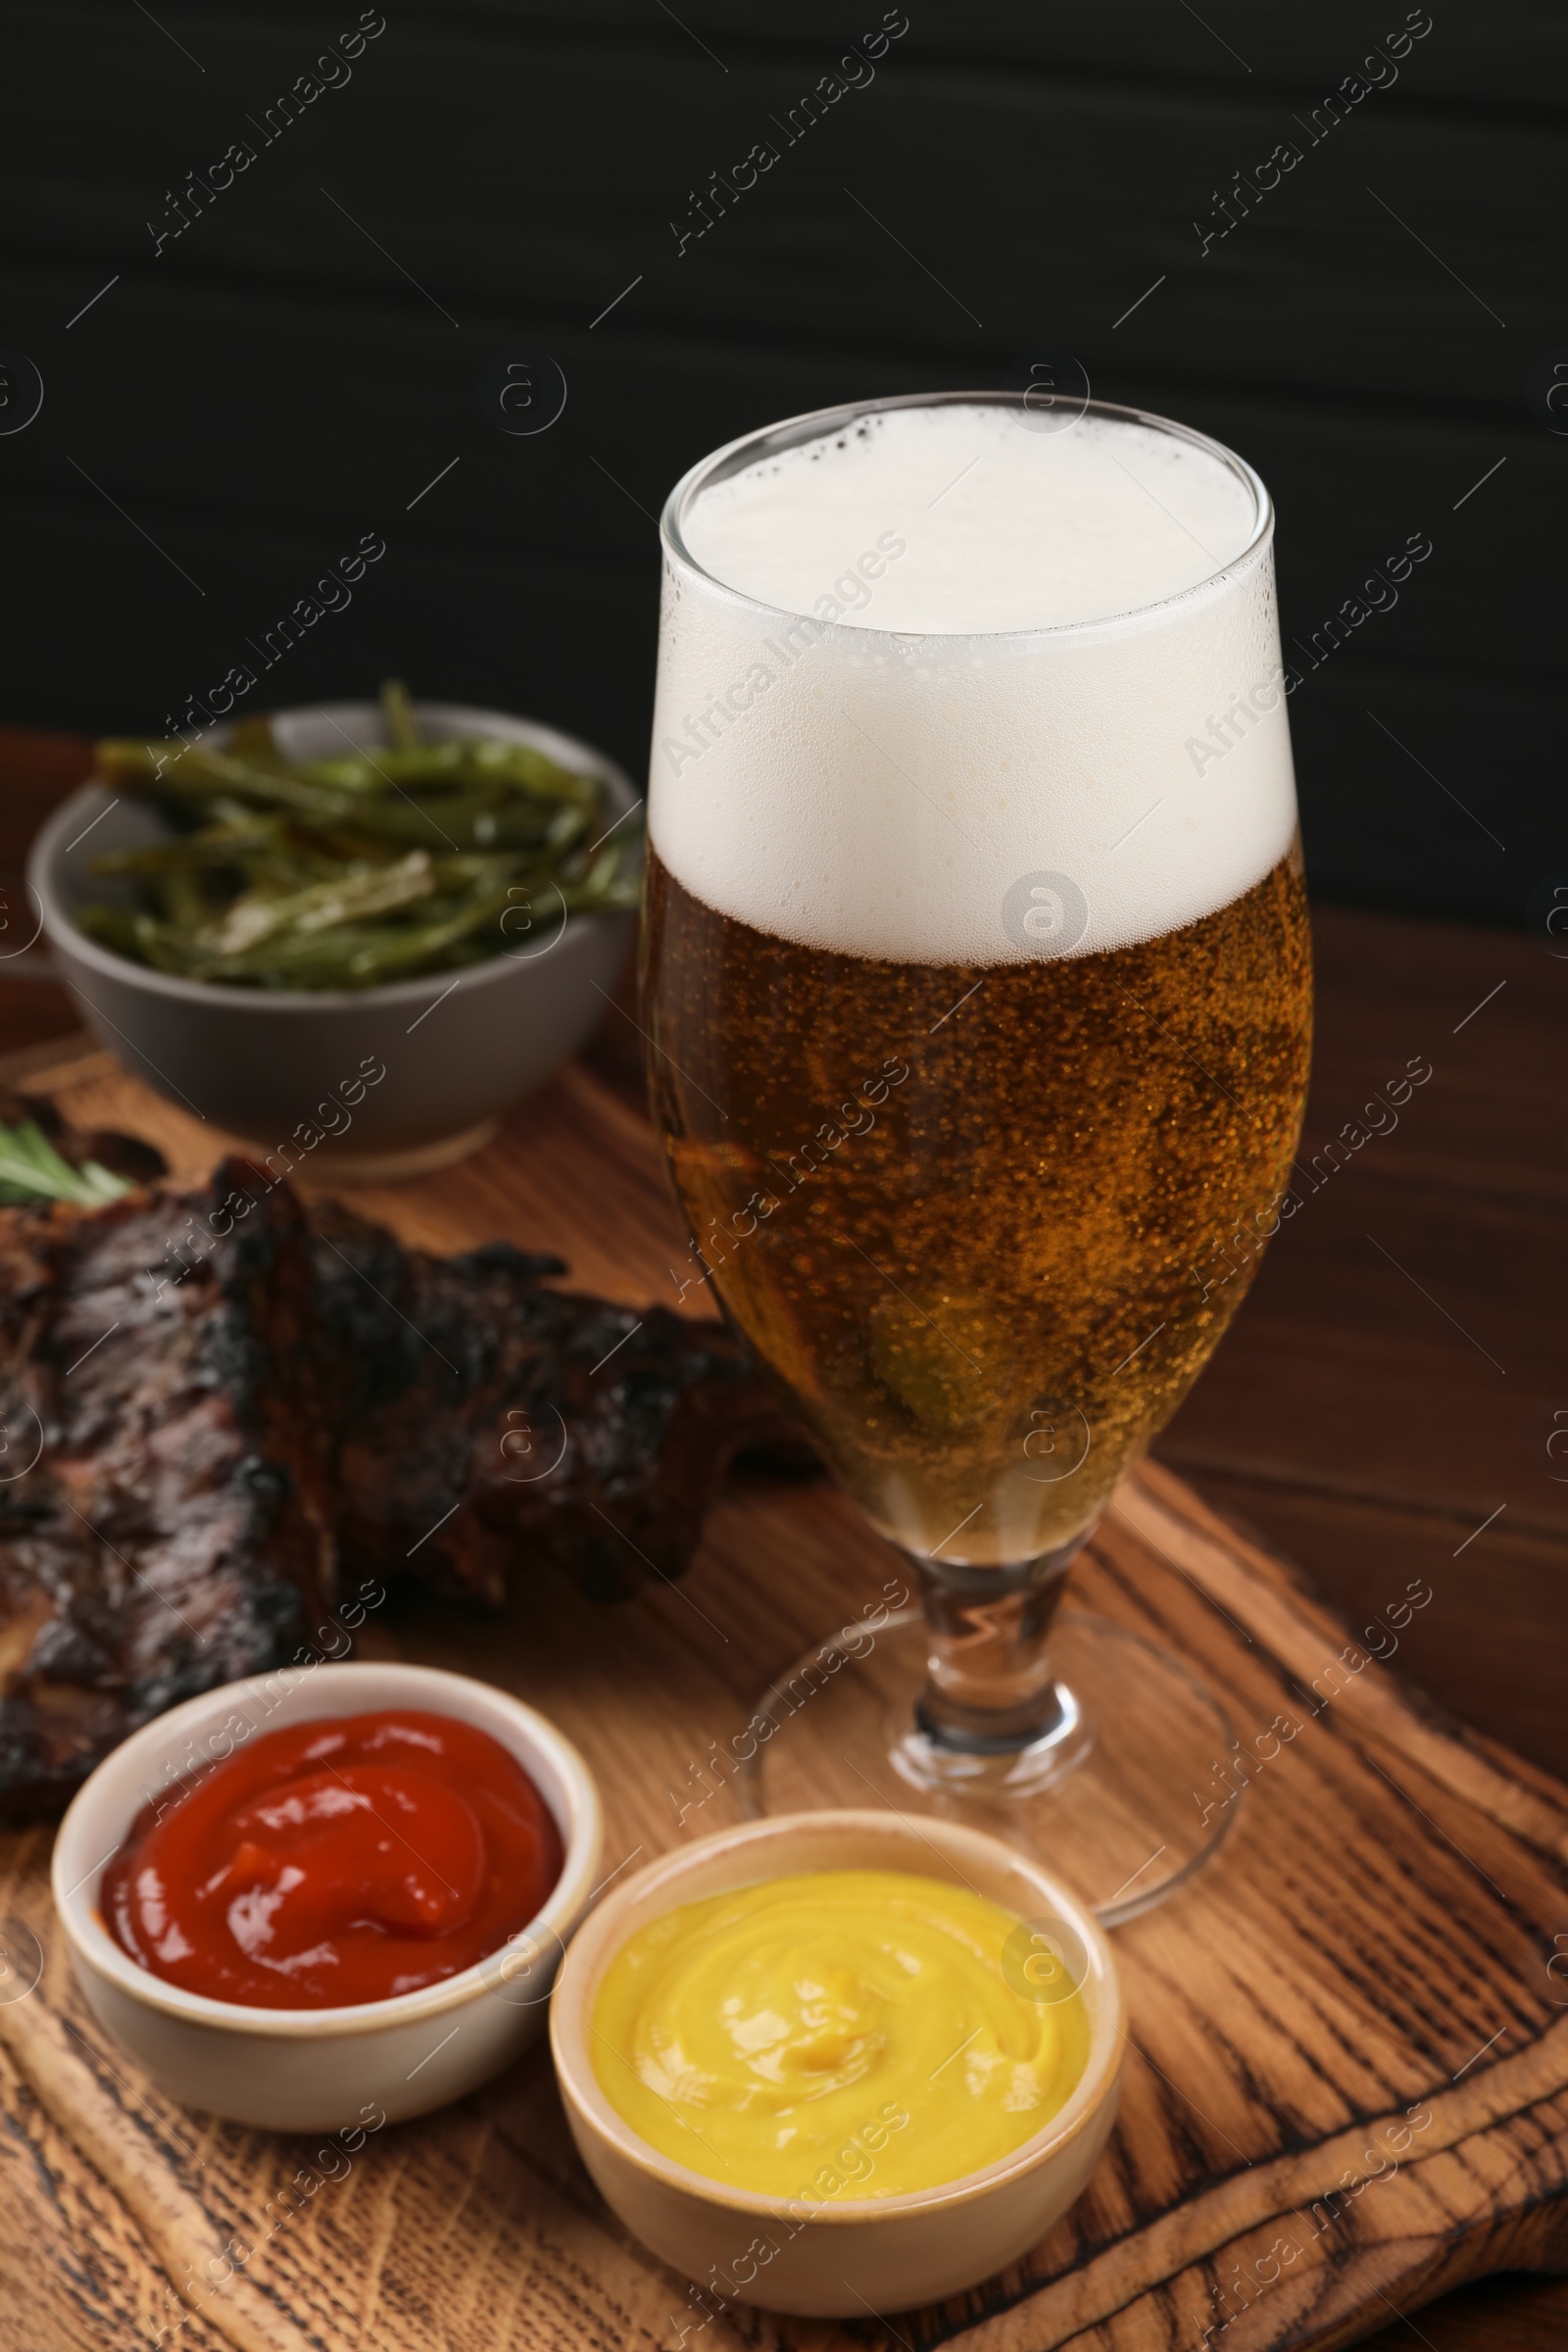 Photo of Glass of beer, delicious grilled ribs and sauces on wooden table